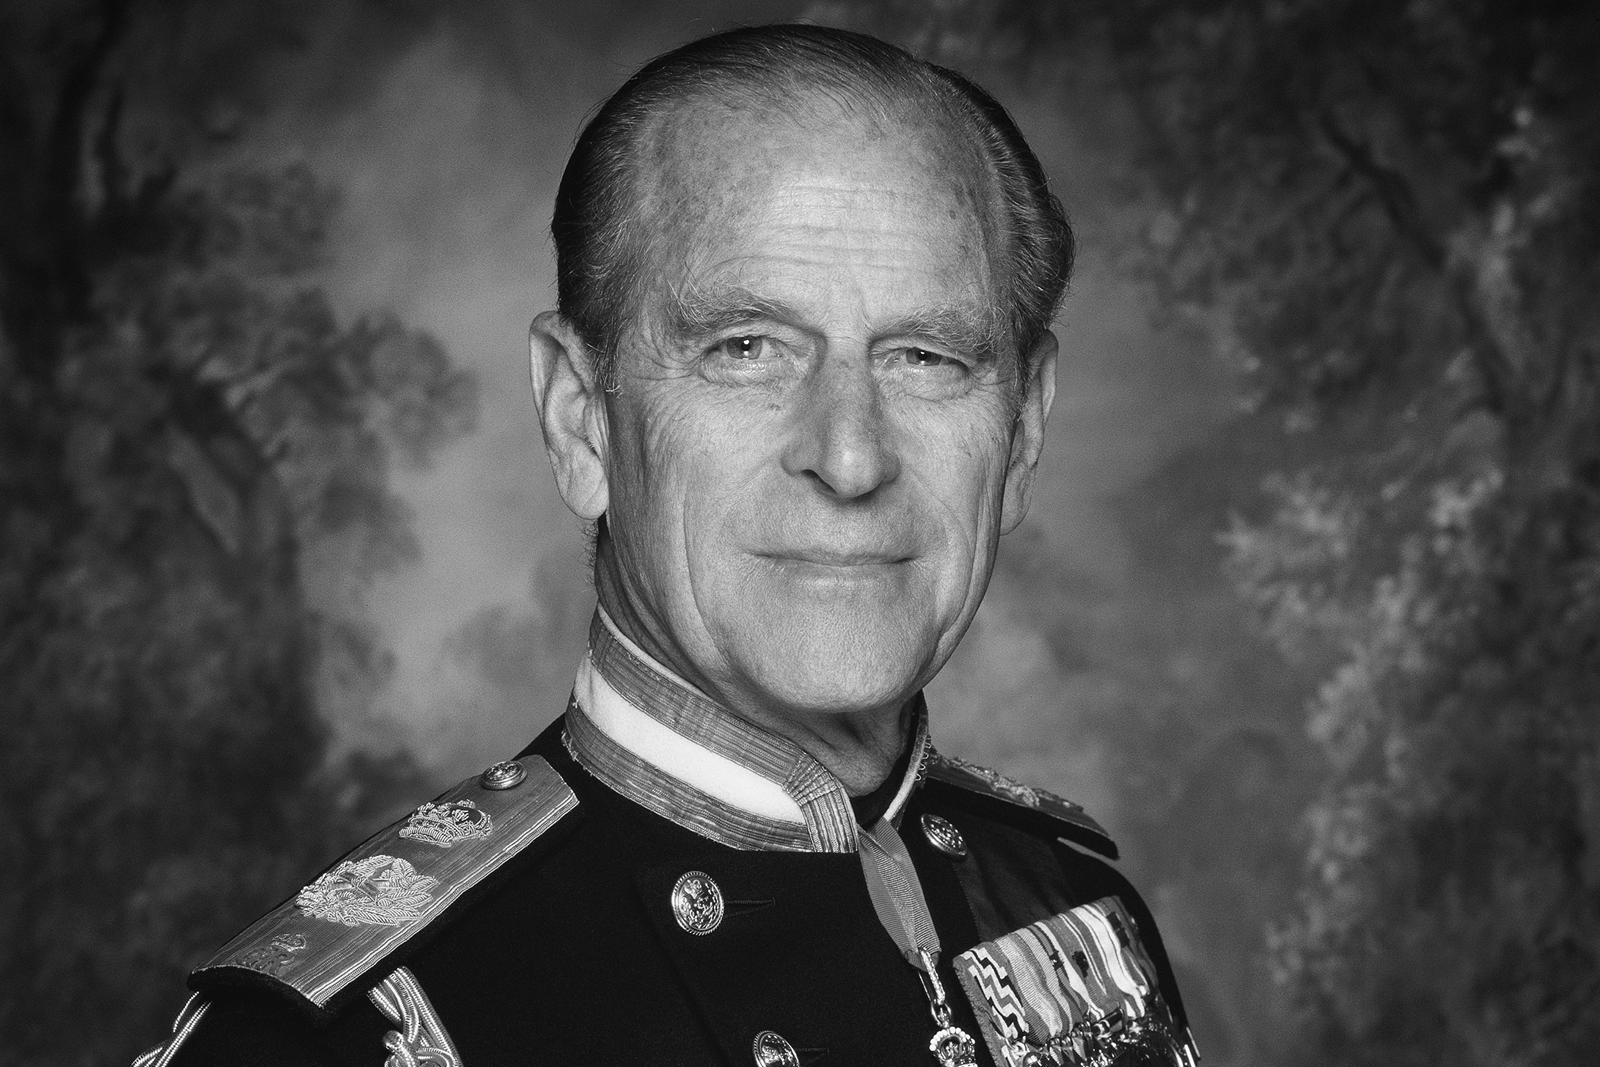 Prince Phillip - Image The Royal Family Twitter Account